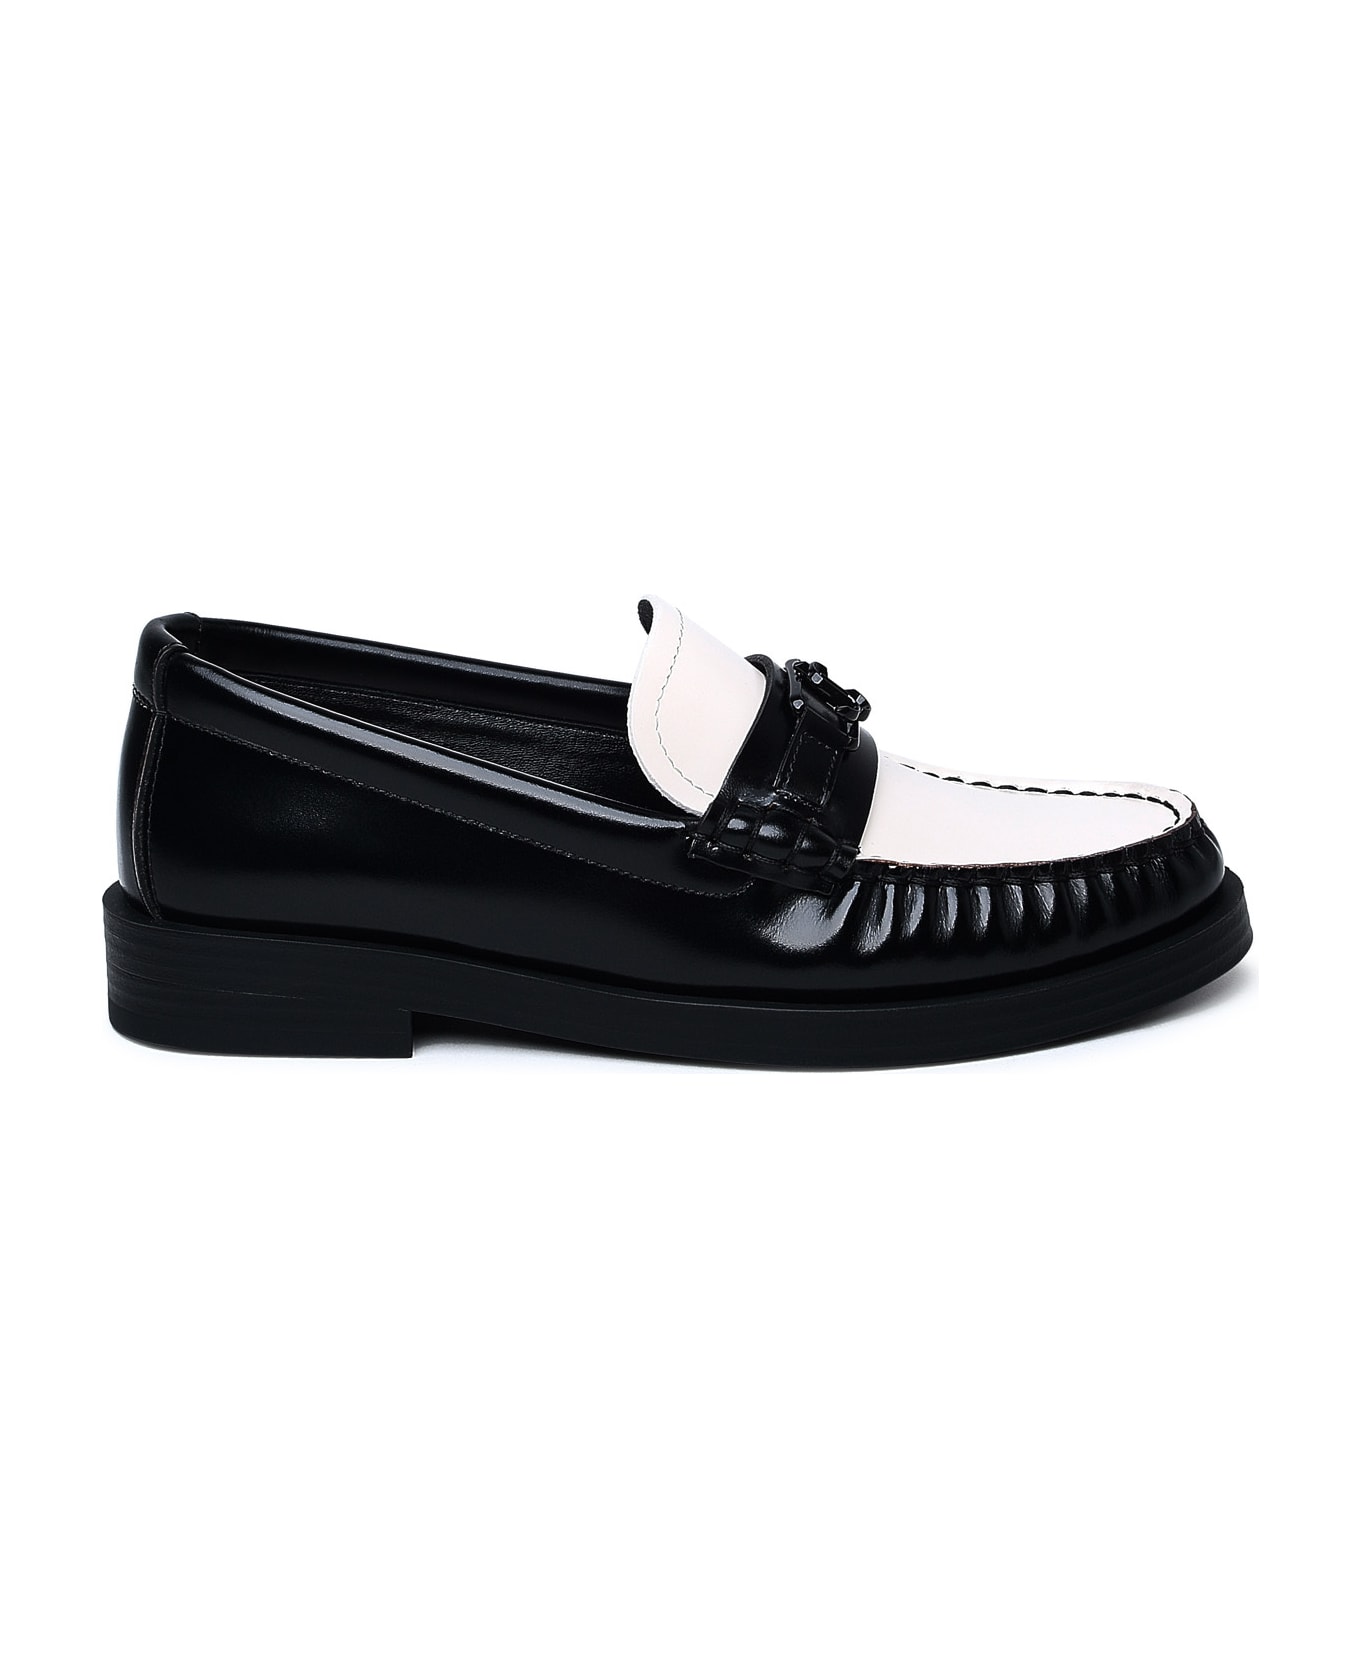 Jimmy Choo Two-tone Leather Loafers - Black フラットシューズ